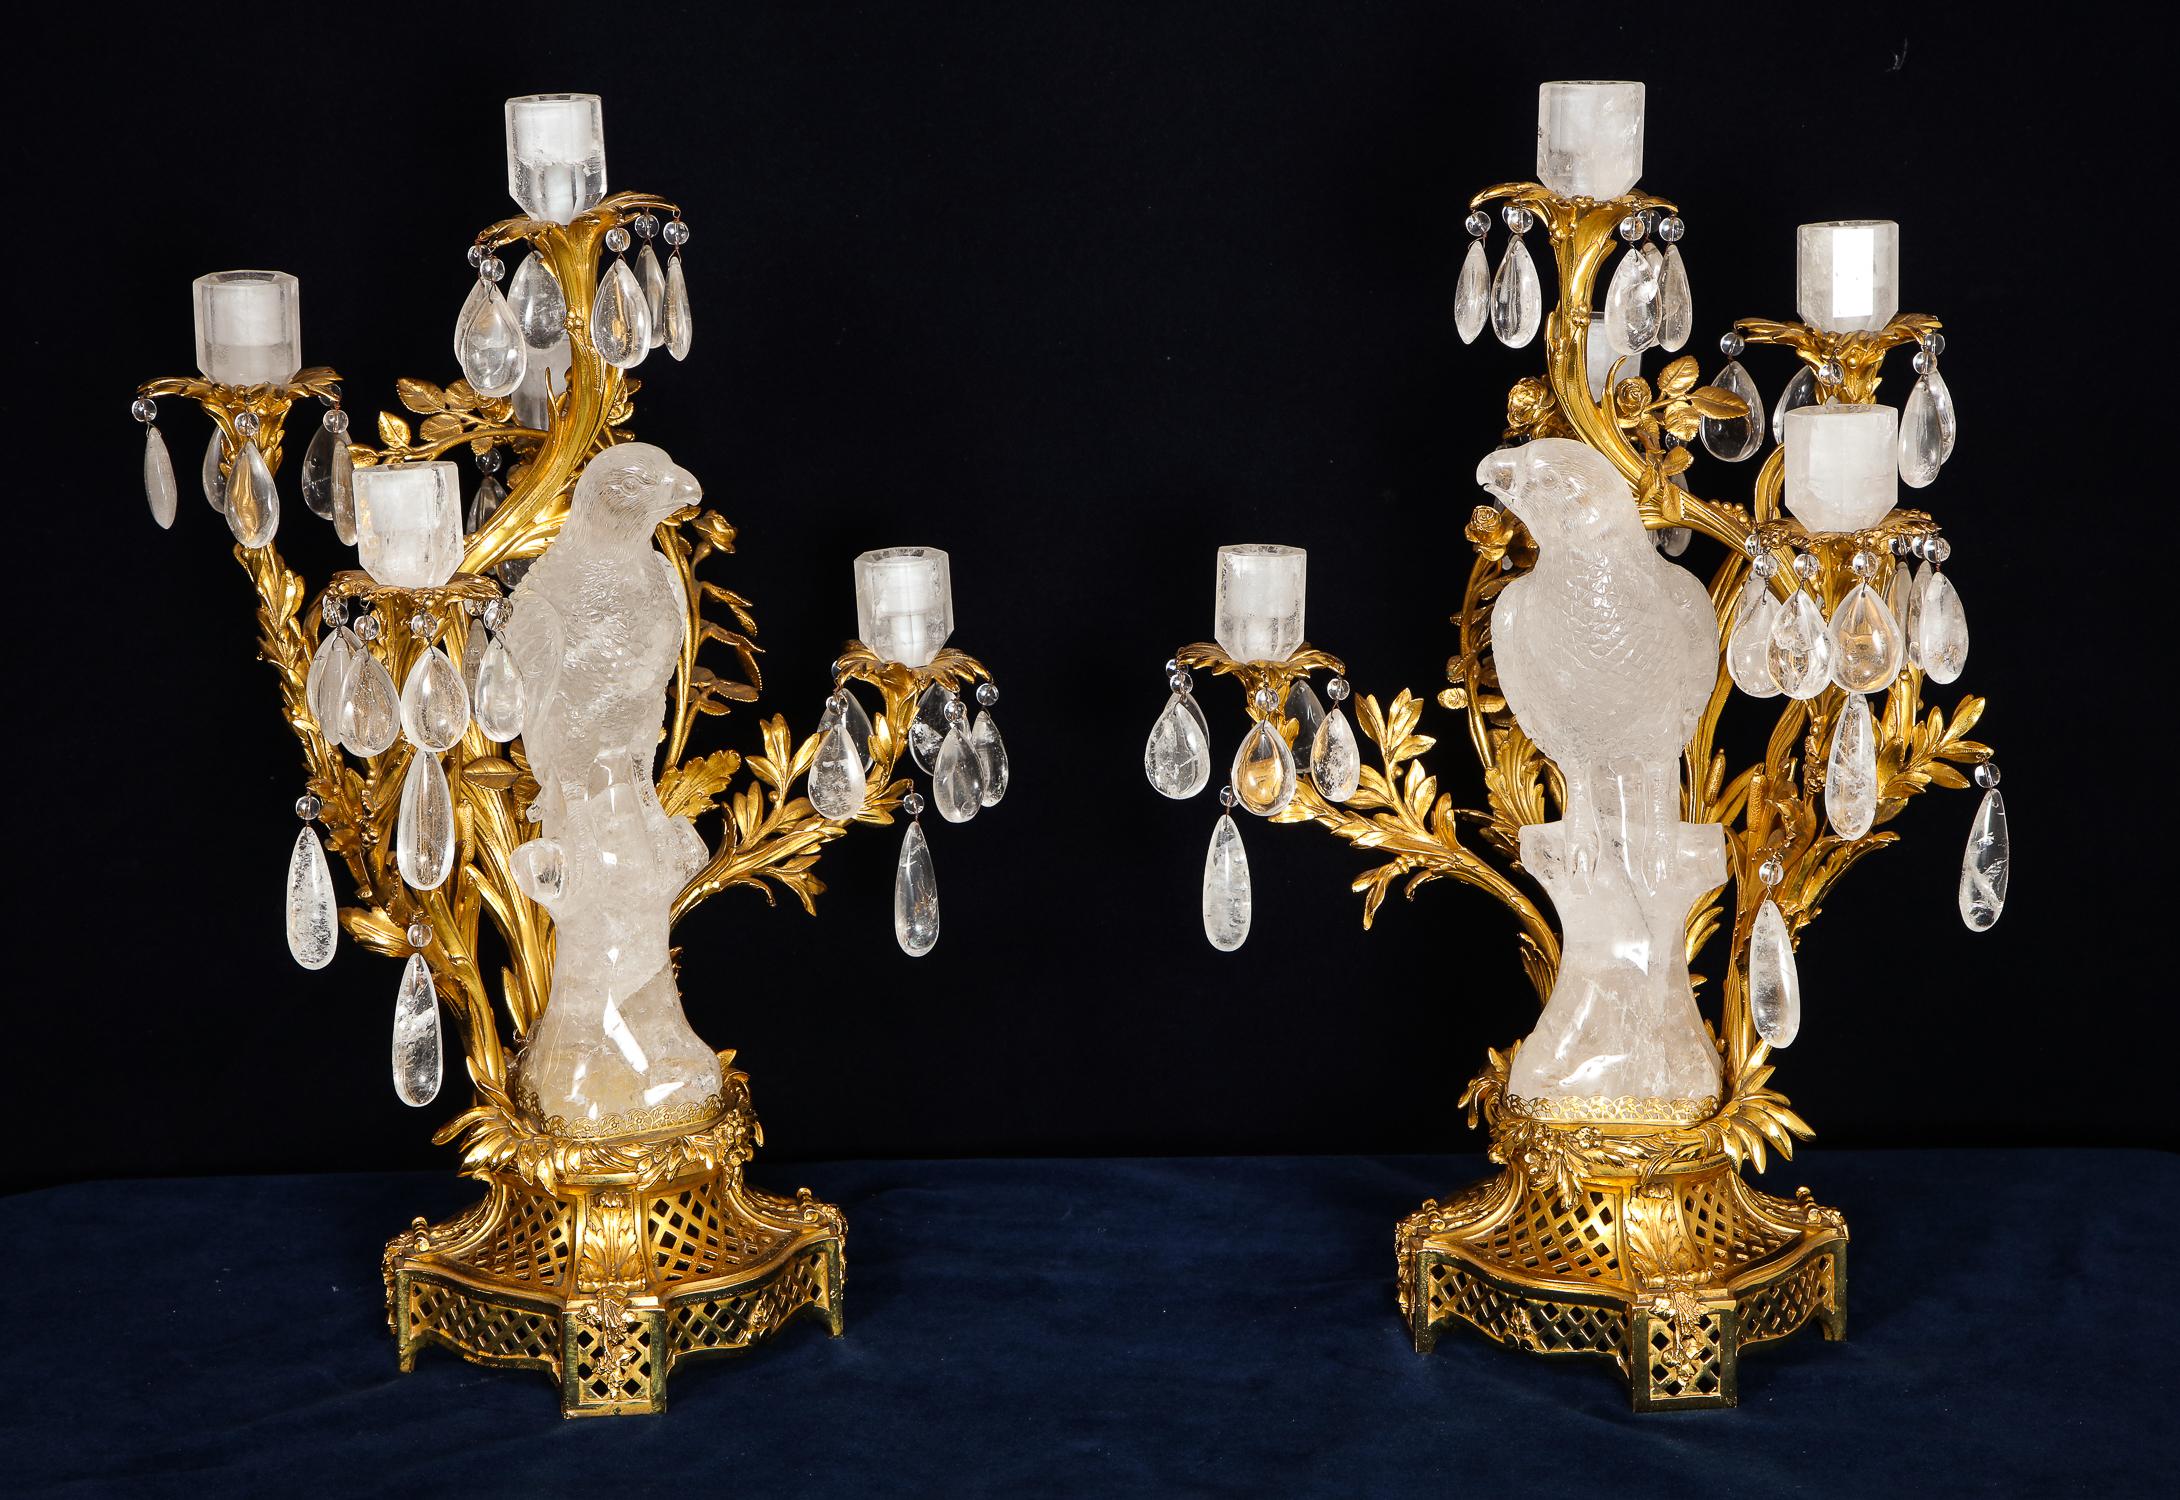 Gilt Pair of Bagues Antique French Louis XVI Style Parrot Rock Crystal Candelabras